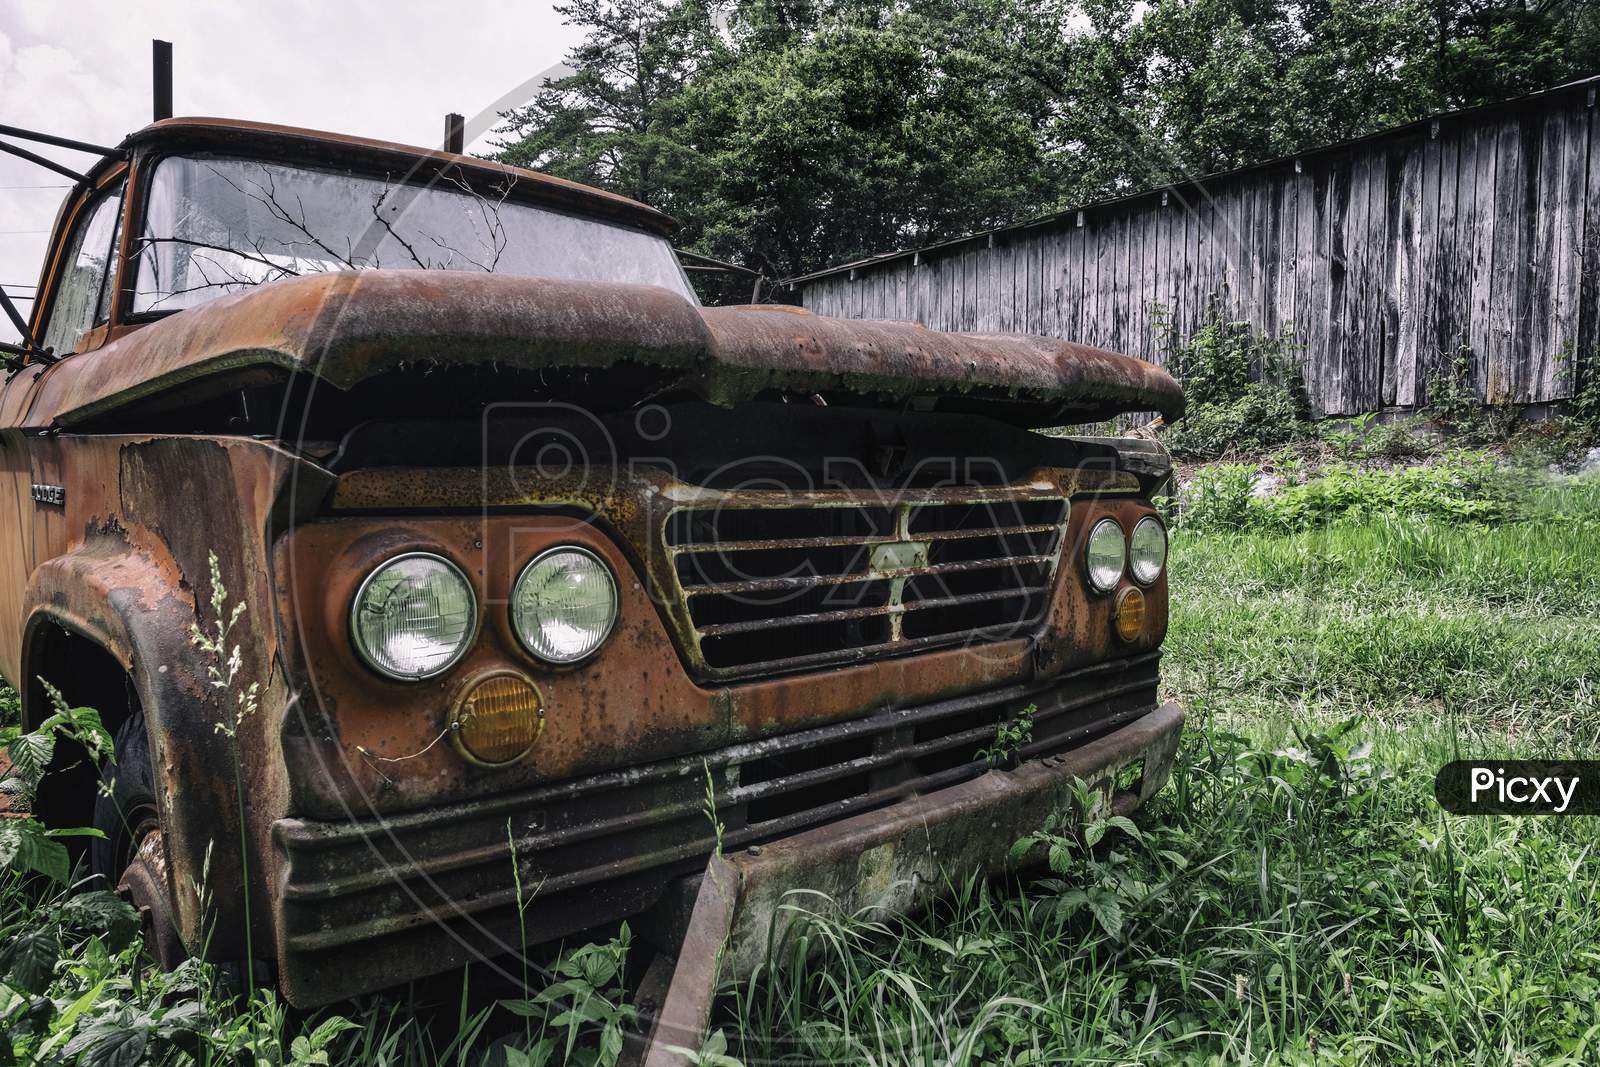 Old Rusted Car In Grass, Field